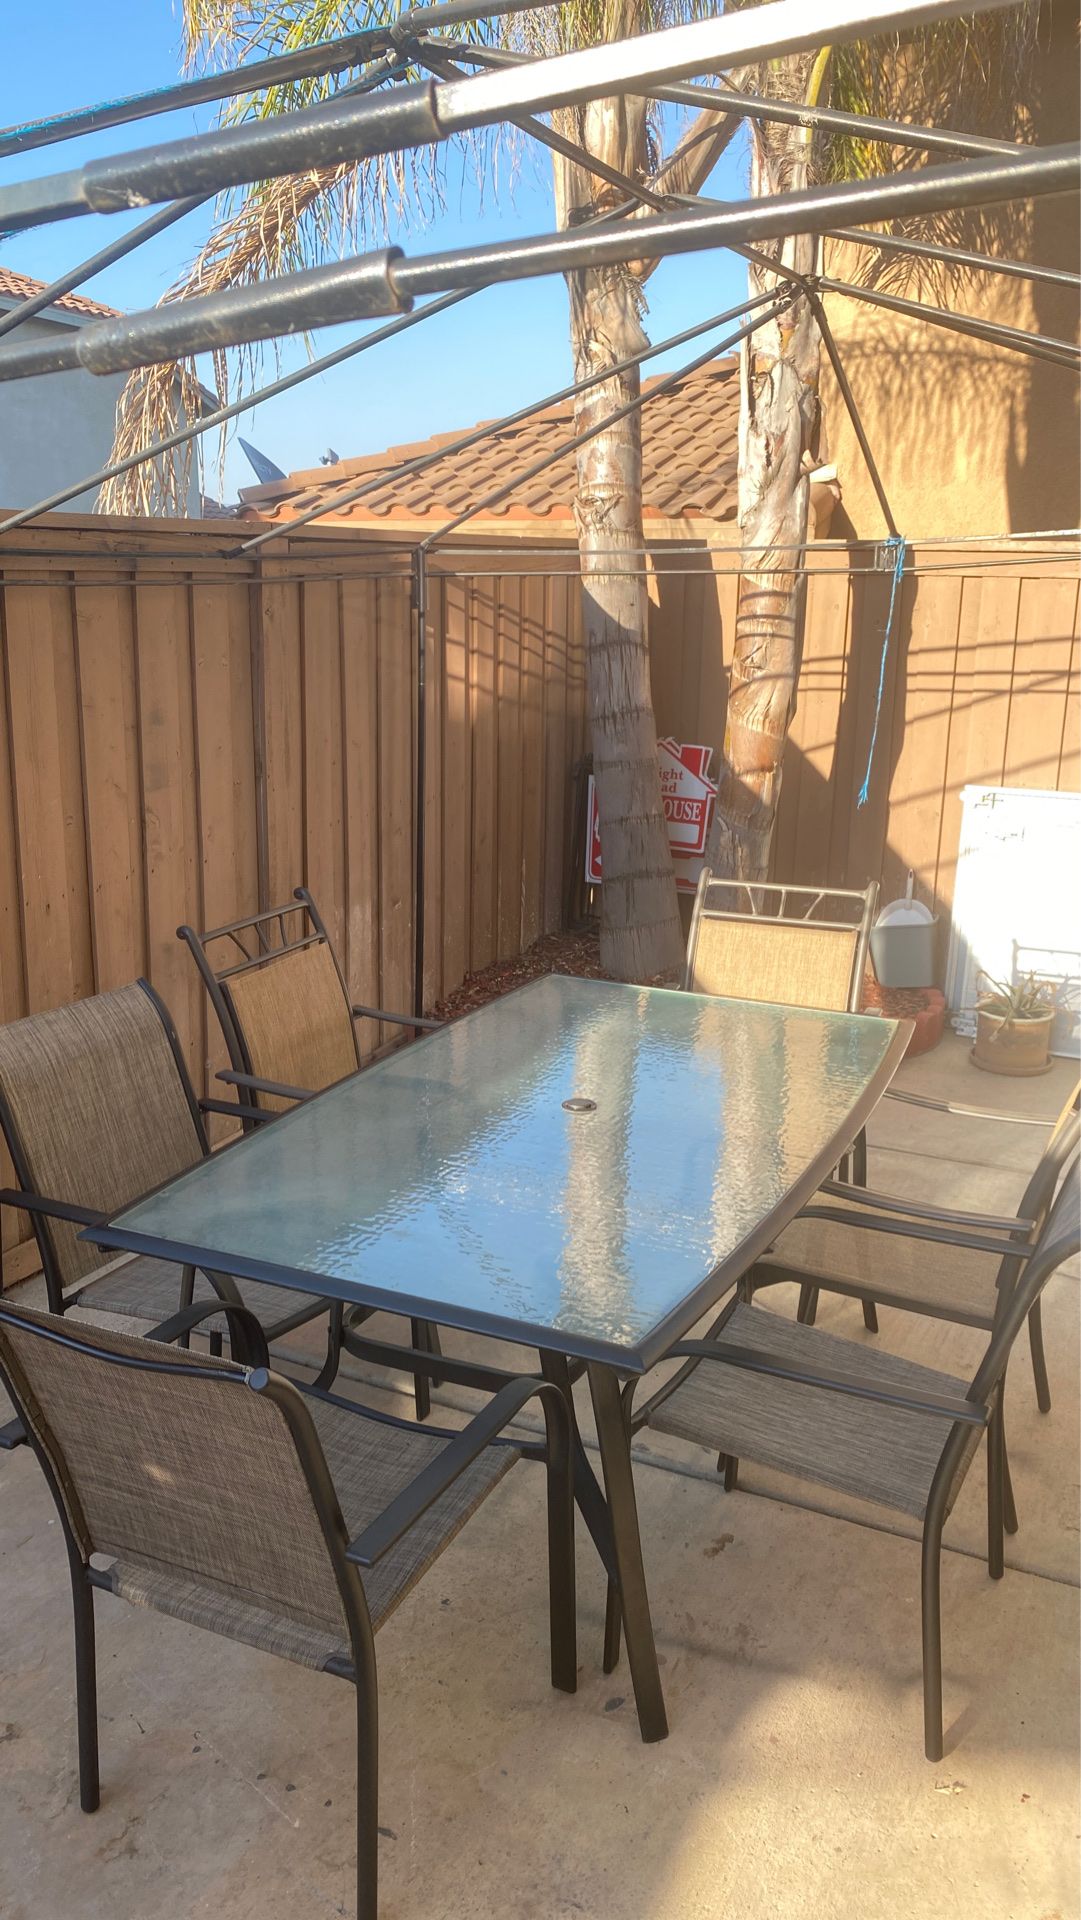 Nice clean good condition outdoor furniture come with table and 6 pics brand new not used chairs $ 200.